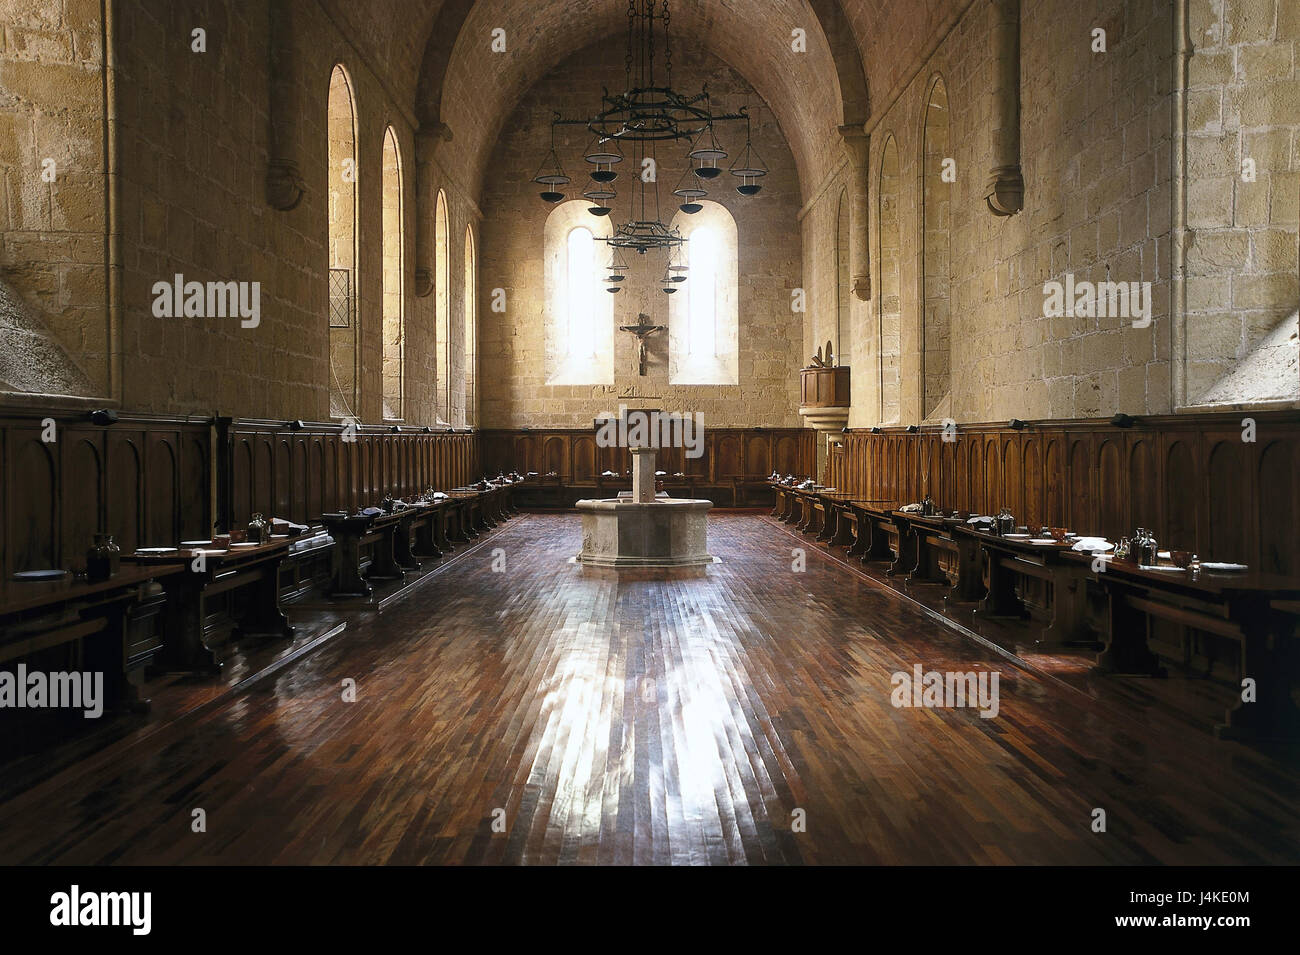 Spain, Catalonia, Monasterio Santa Maria de Poblet, dining room Europe, Cistercian monastery, cloister, structure, king's cloister, hall, tables, dishes, covered, architectural style, architecture, culture, place of interest, UNESCO-world cultural heritage Stock Photo